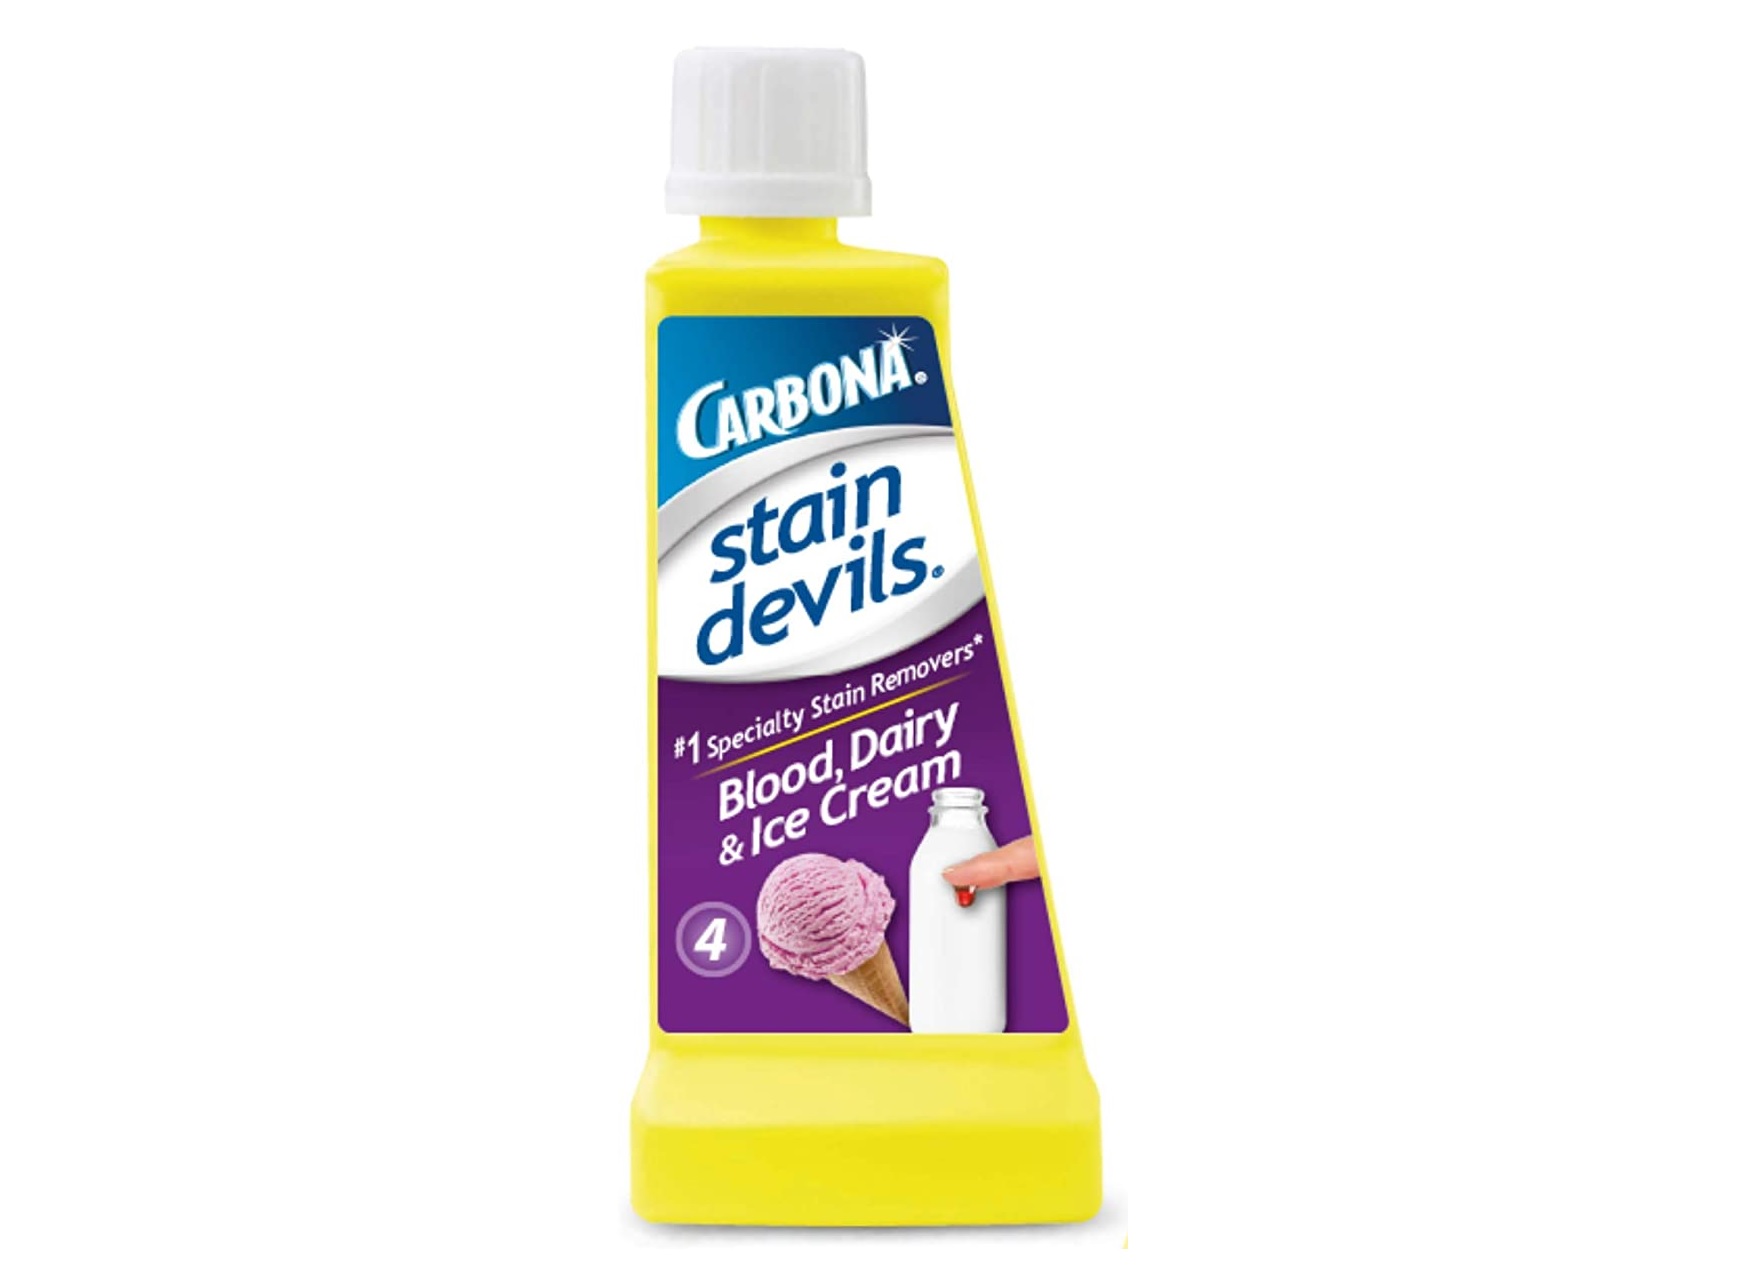 Carbona Stain Devils Blood & Dairy stain remover